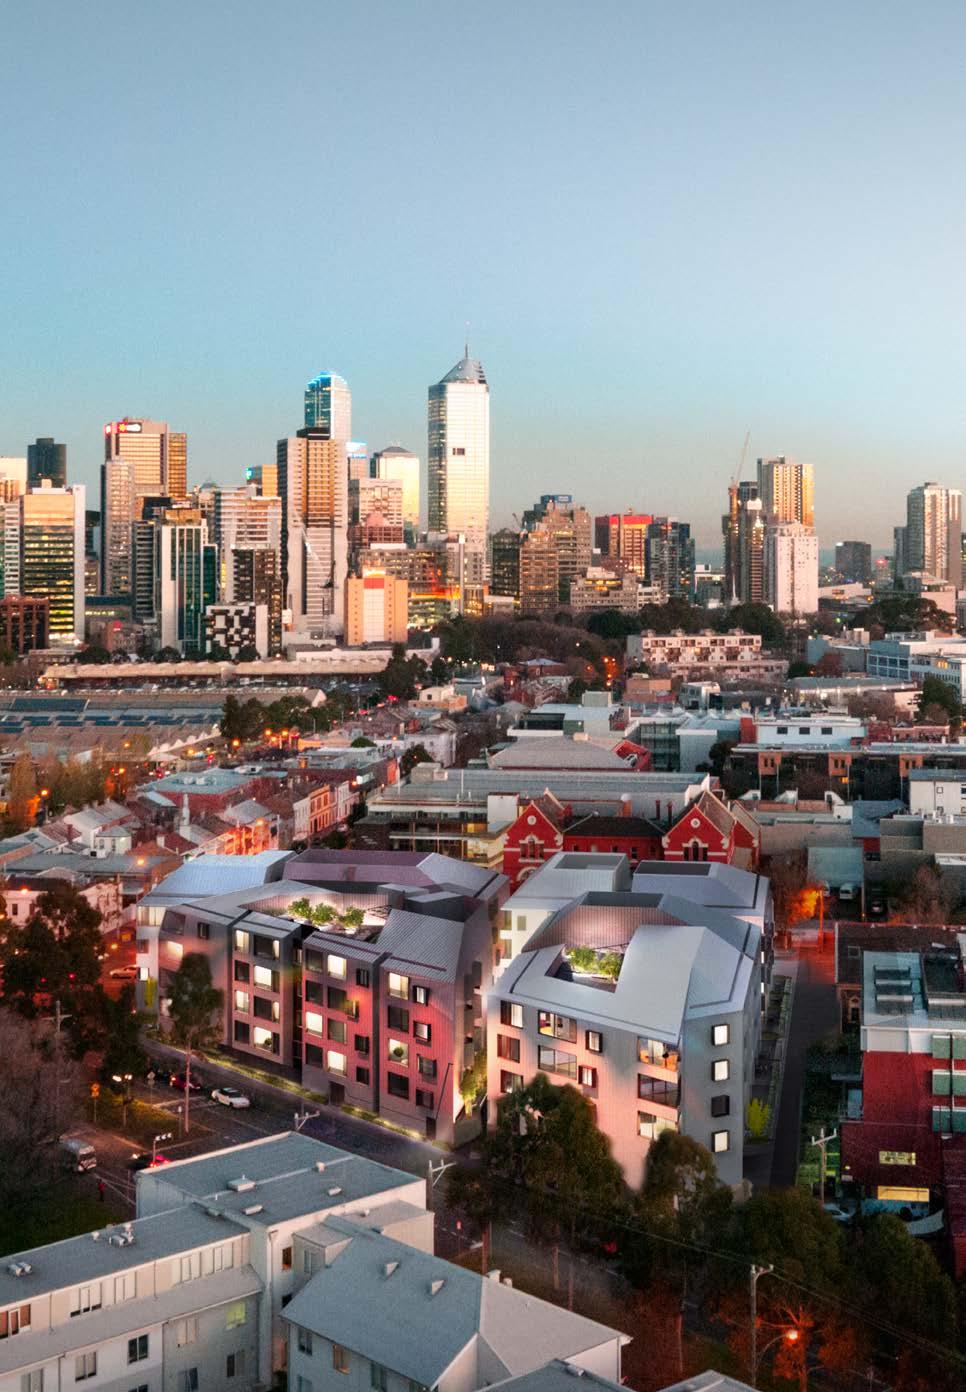 Only a short stroll from Melbourne s CBD, Assembly offers cosmopolitan living at its very finest.